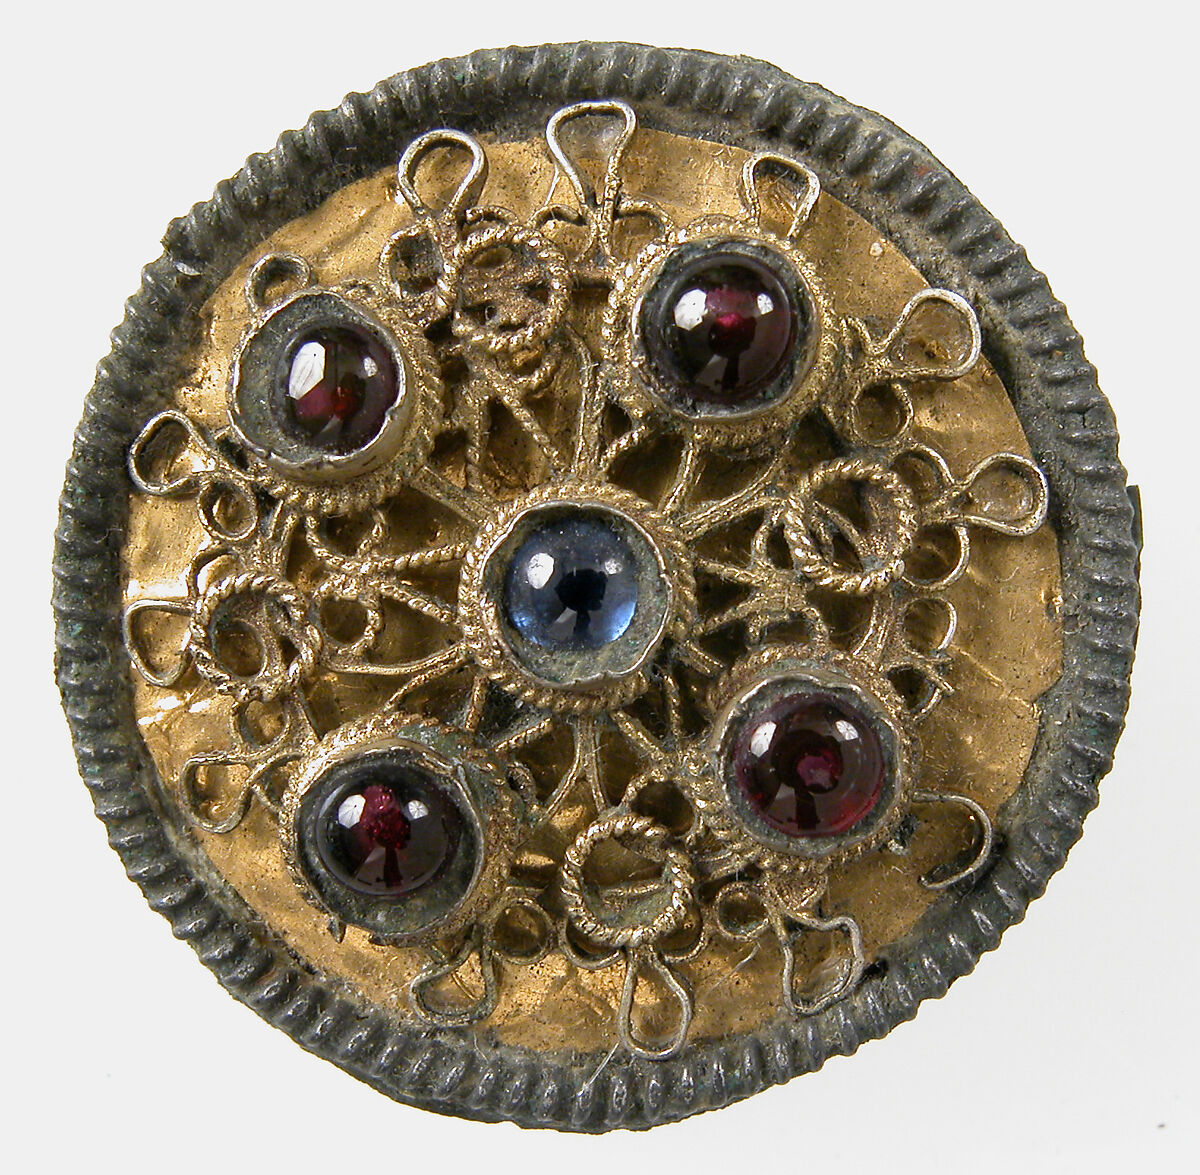 Disk Brooch, Copper alloy, coated with gold, garnets, sapphires cabochons, Frankish 